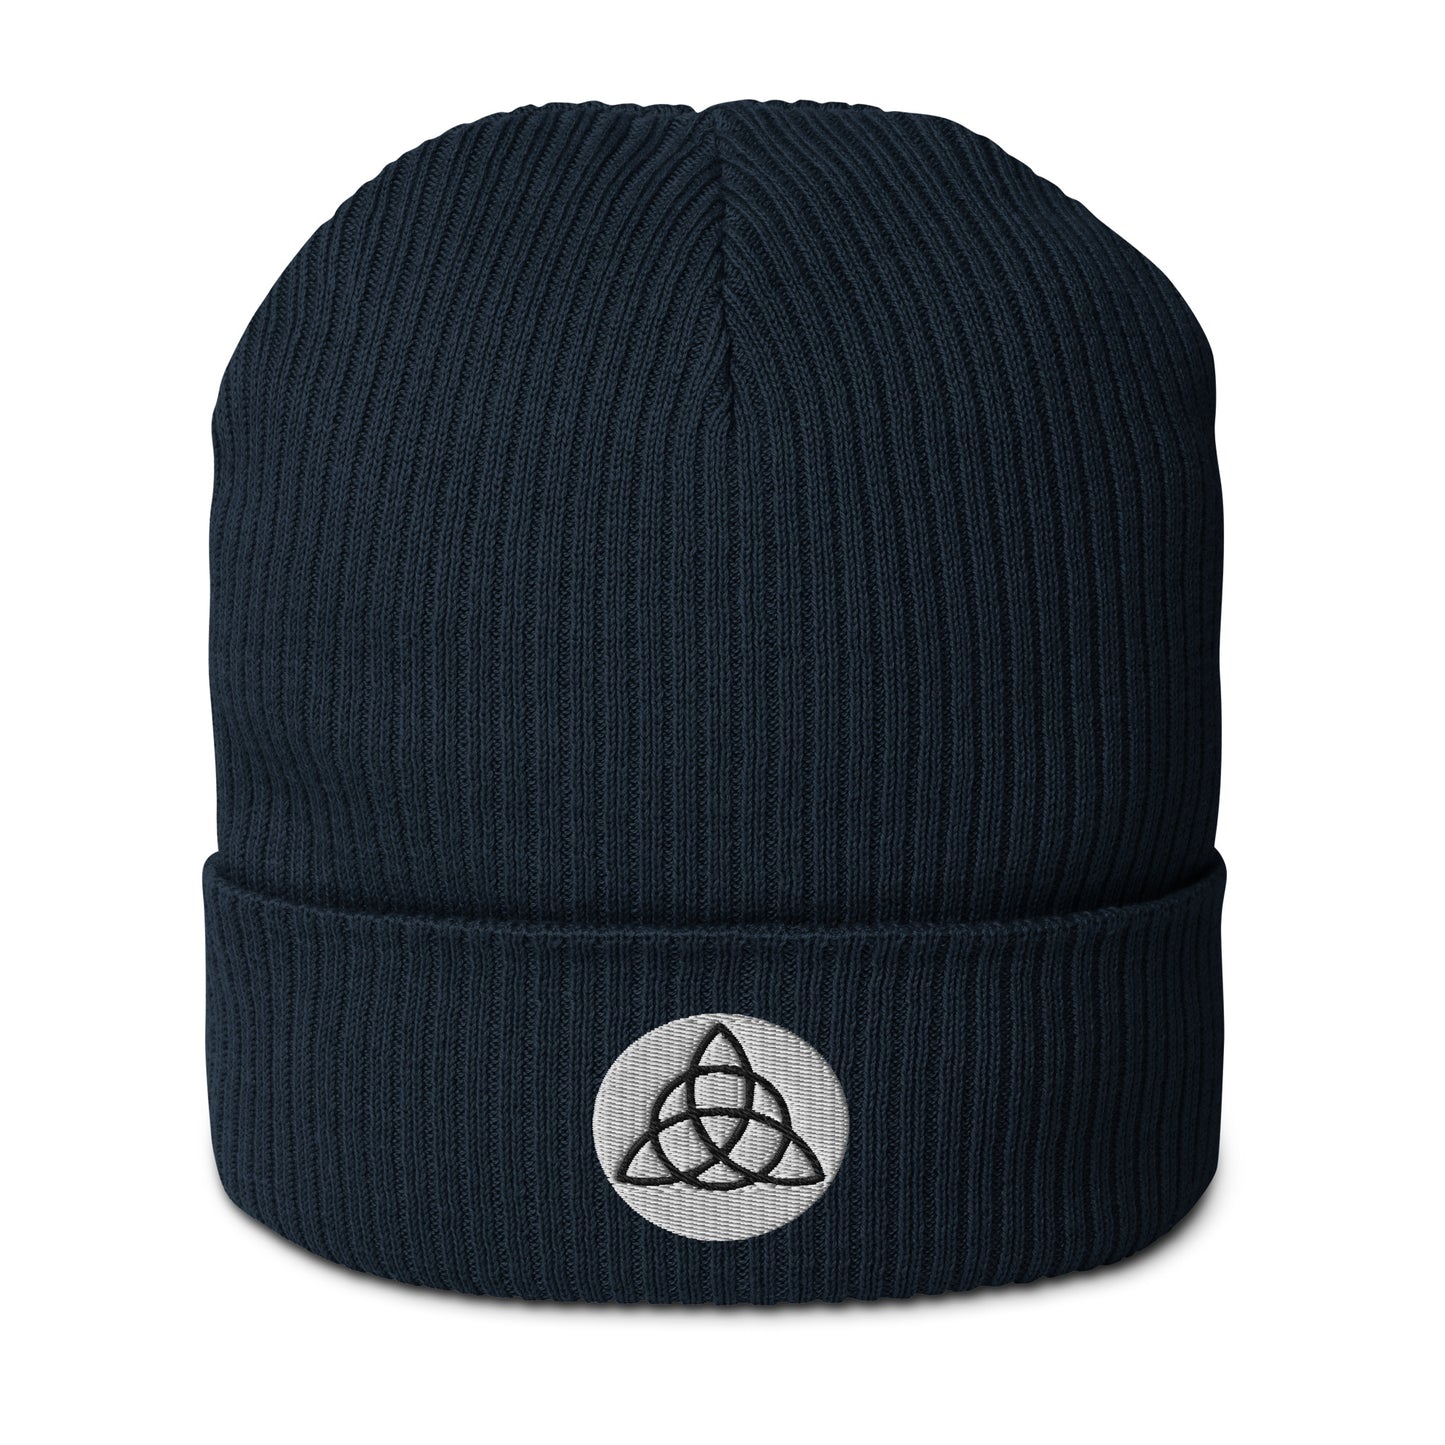 A ribbed beanie in an Oxford Navy hat made of organic cotton, embroidered with a Triquetra symbol, symbolizing unity, eternity, and the interconnectedness of mind, body, and spirit. This organic ribbed beanie is chic, versatile, and environmentally conscious, making it an essential addition to your hat collection. Crafted from breathable lightweight fabric, it's suitable for both indoor and outdoor wear. Made with hypoallergenic and natural materials. 